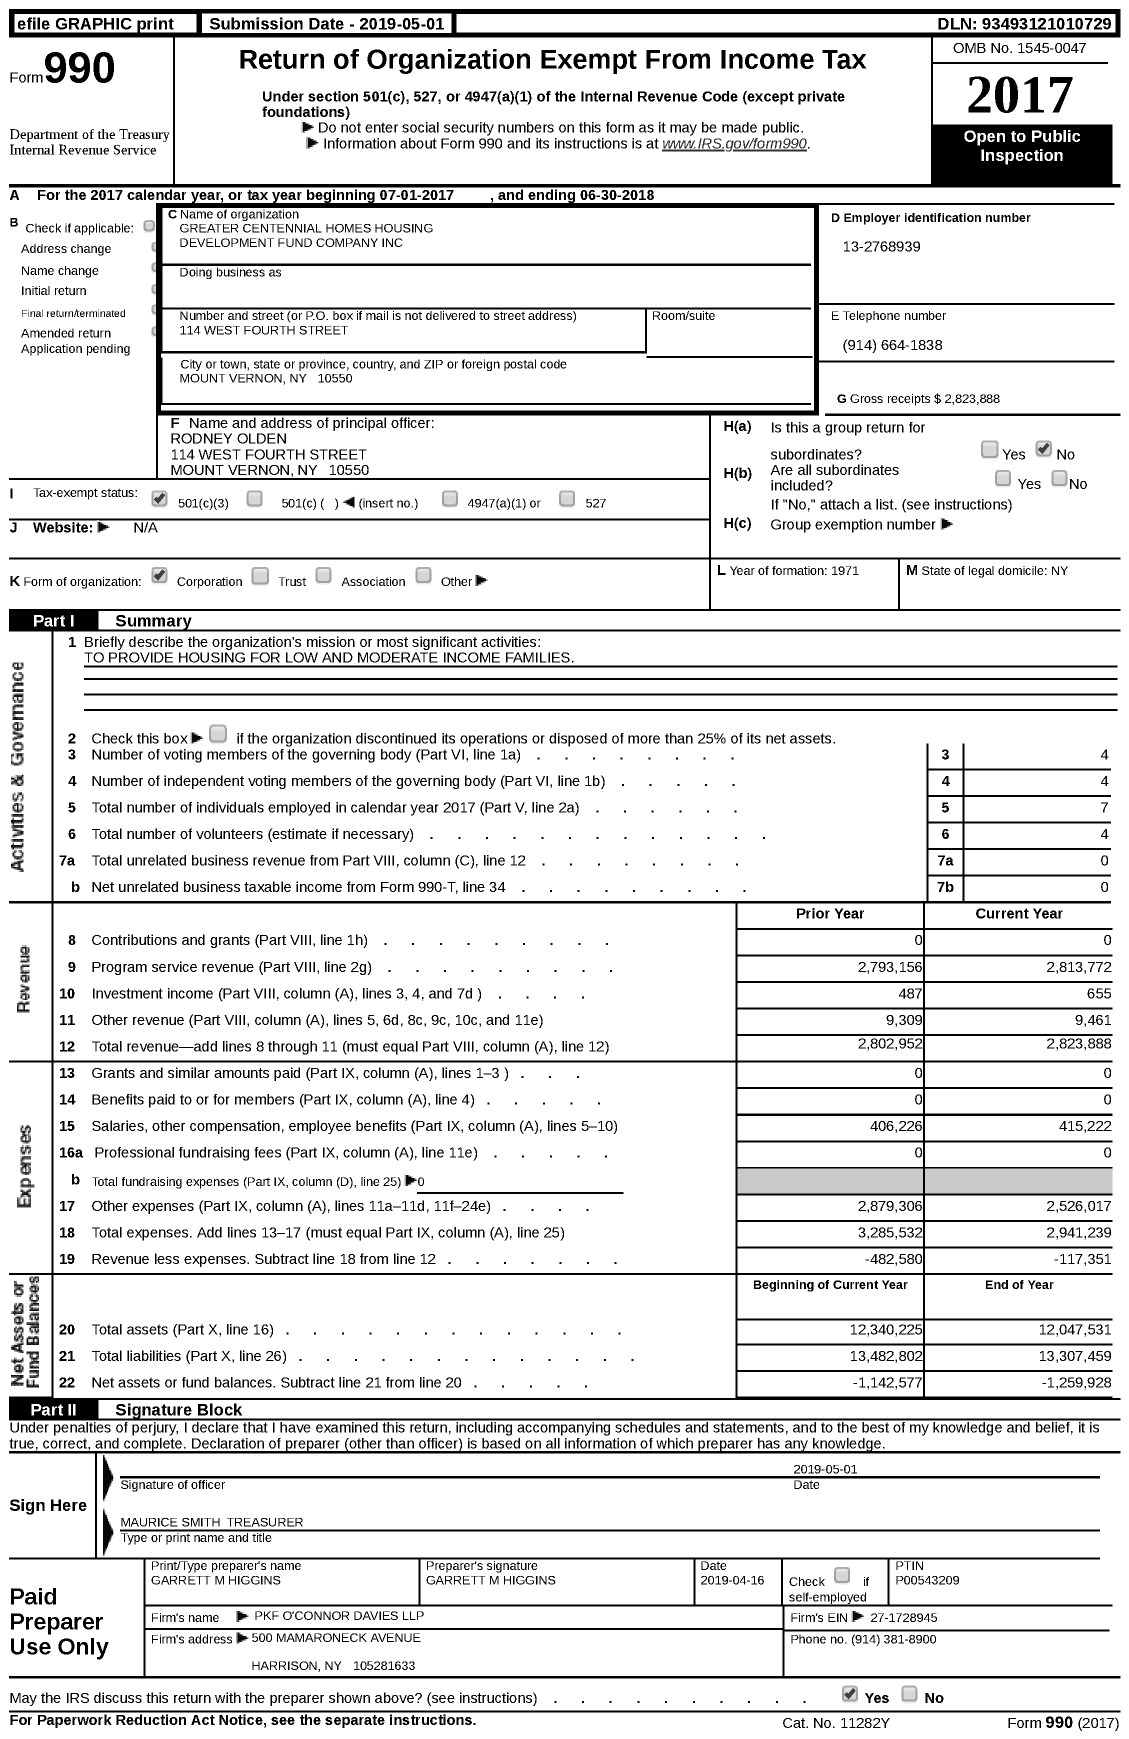 Image of first page of 2017 Form 990 for Greater Centennial Homes Housing Development Fund Company